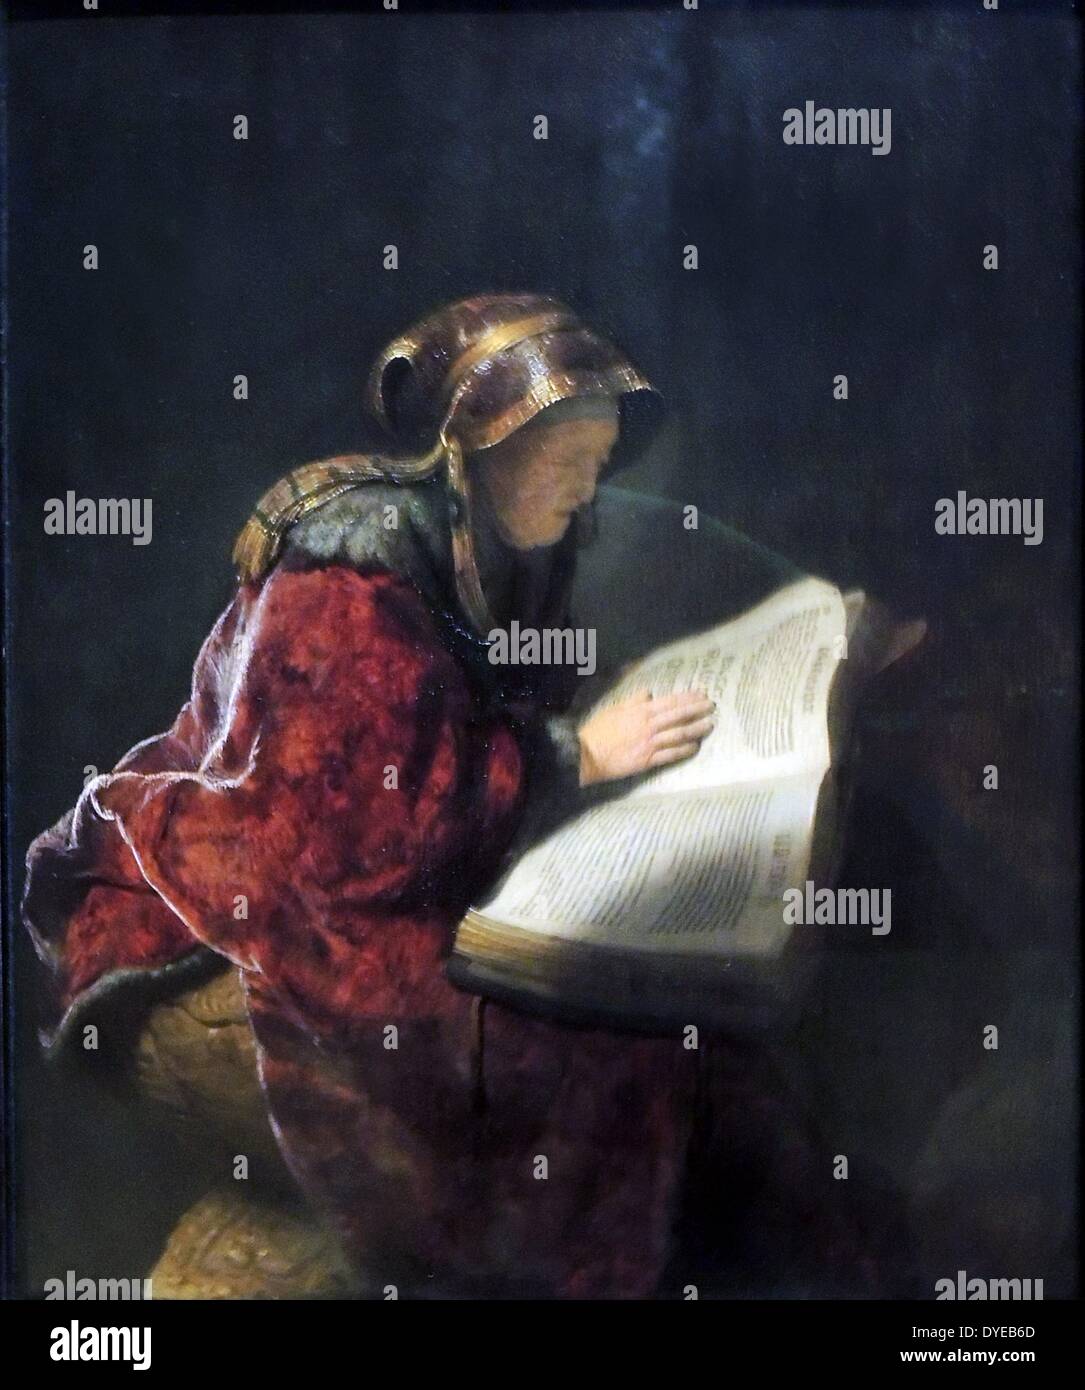 An Old Woman Reading, Probably the Prophetess Hannah by Rembrandt Harmens van Rijn (1606-1669) oil on panel, 1631. Light comes in from behind the old woman: the vivid glow illuminates the book and her hand, so thickly painted that the wrinkles seem almost modelled in clay. Her face remains in shadow. The woman could be the biblical prophetess Hannah. According to the Gospel of Luke, she was an elderly widow who worshipped God night and day with fasting and prayer. Stock Photo